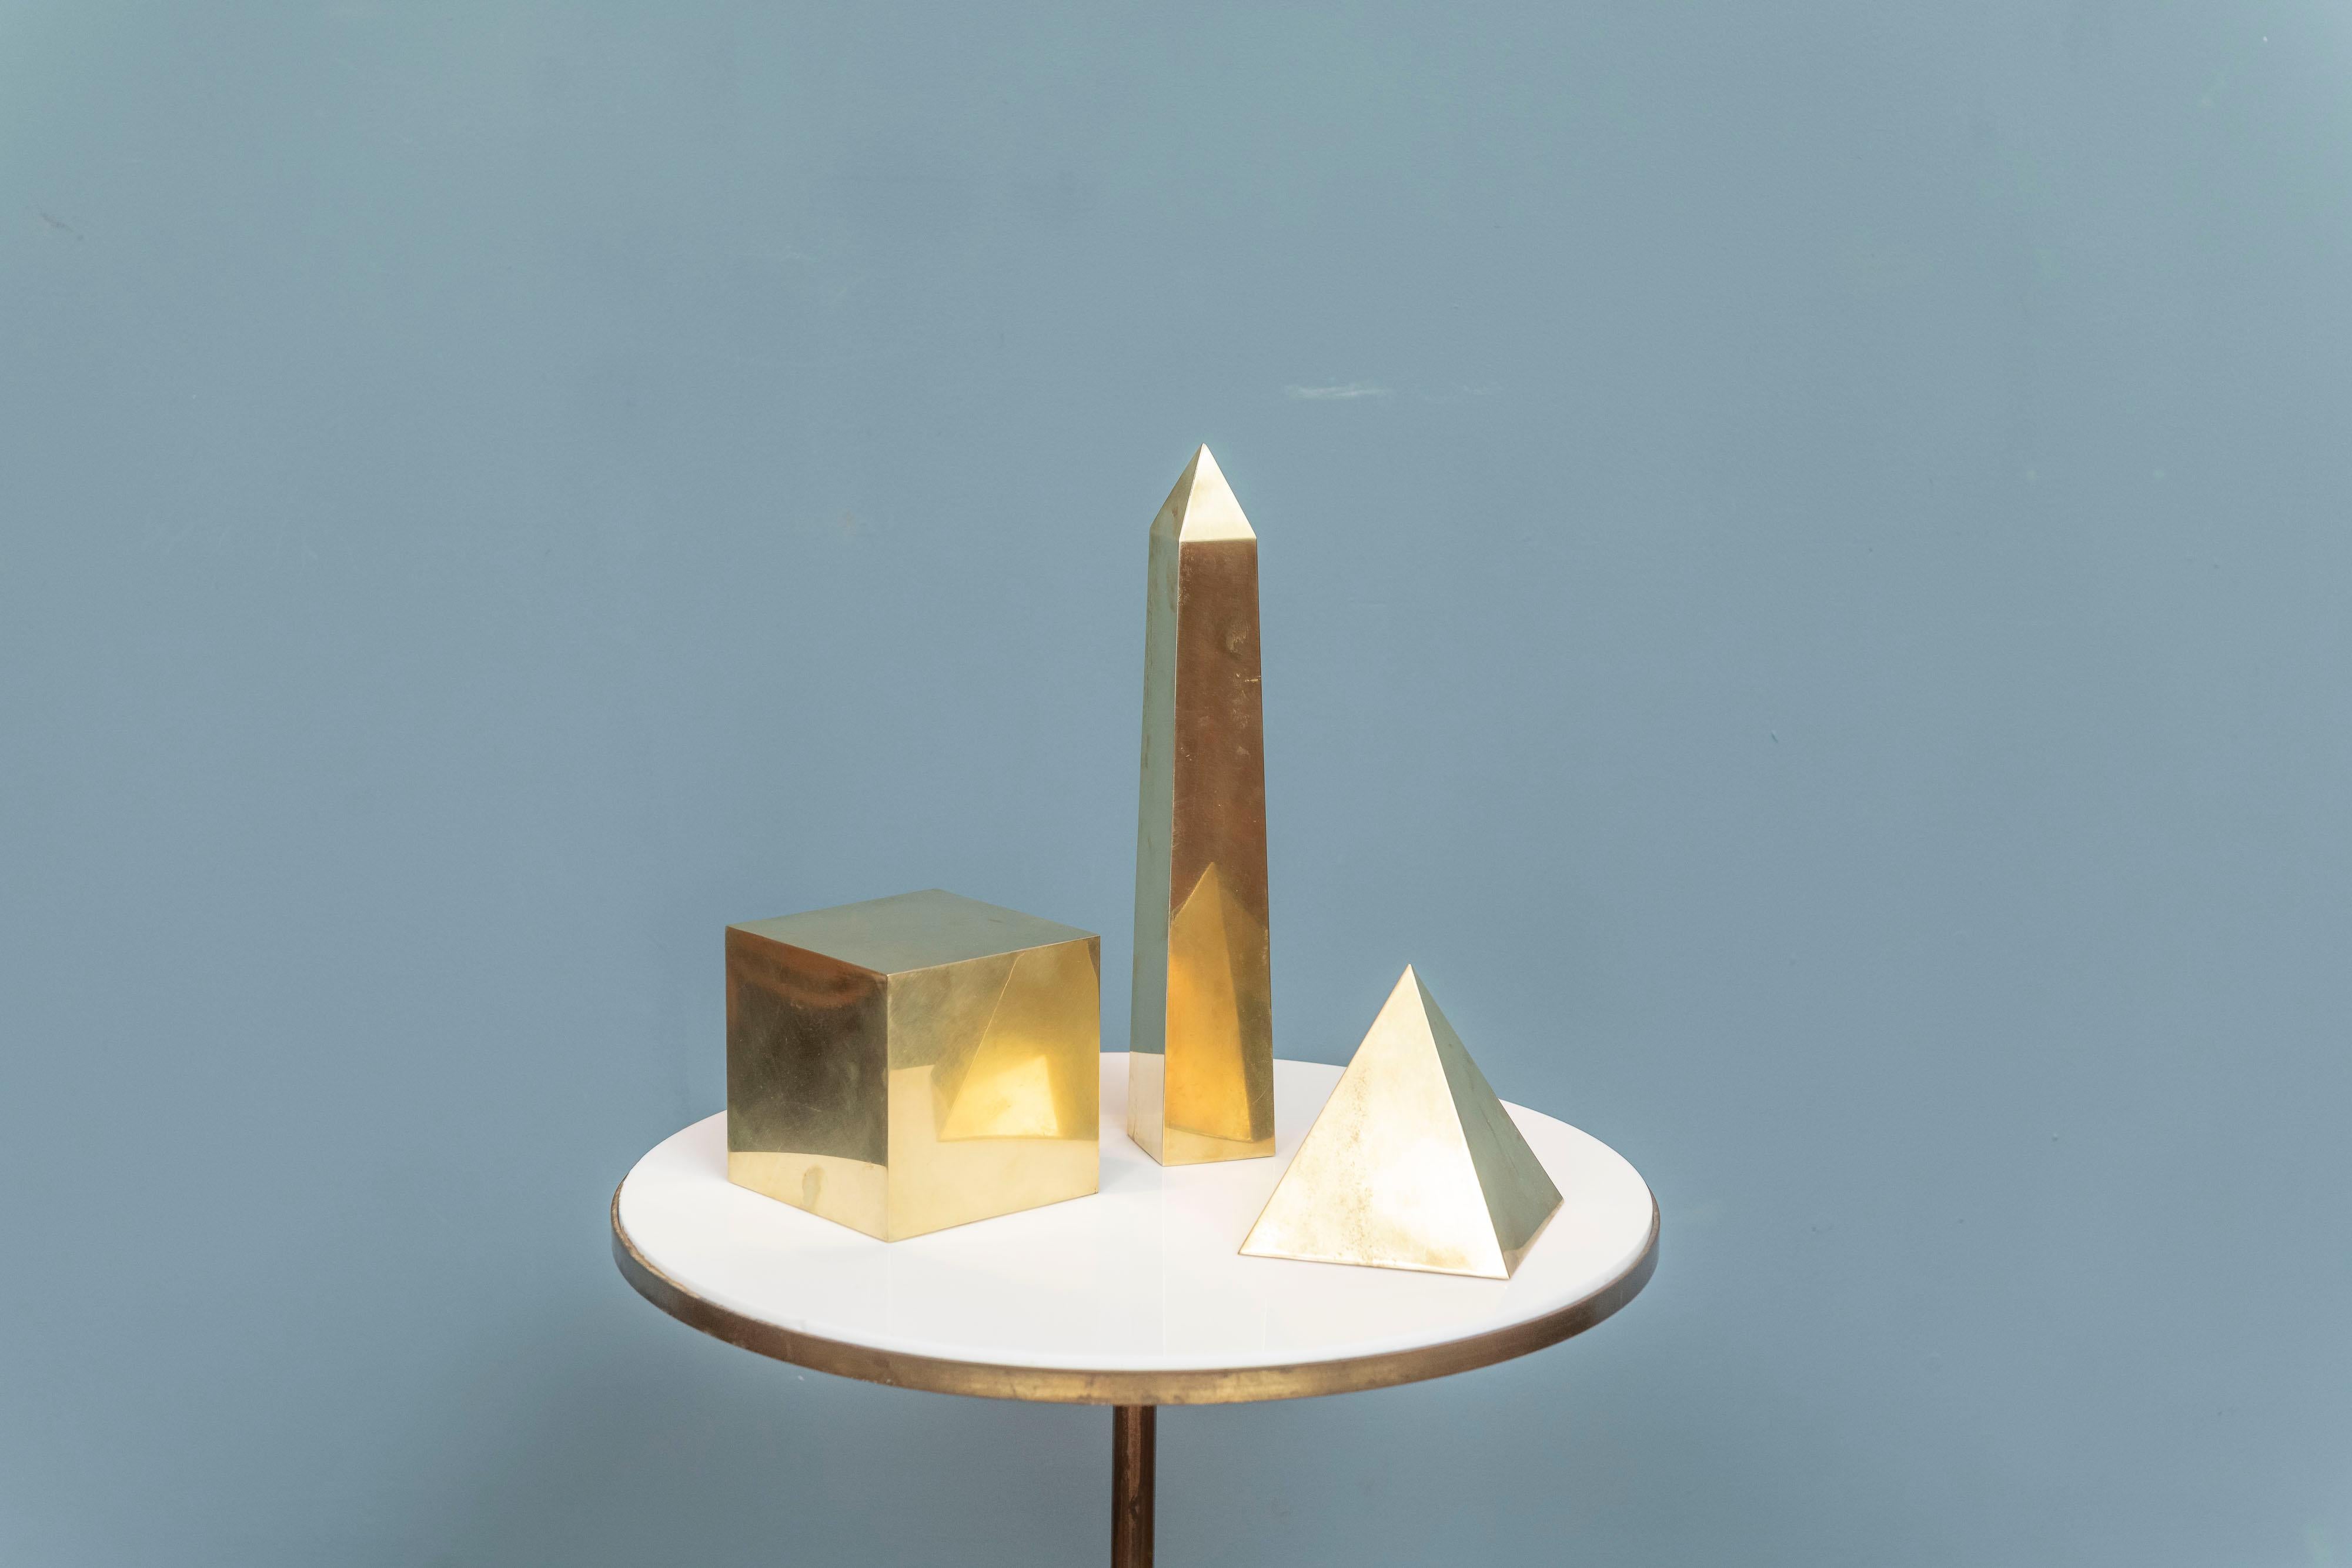 Sarried Ltd. design group of three brass classical table objects, Made in Italy. Interesting architectural models comprising a pyramid, obelisk and a square perfect for a coffee table or desk.

Measures: Obelisk 14.5